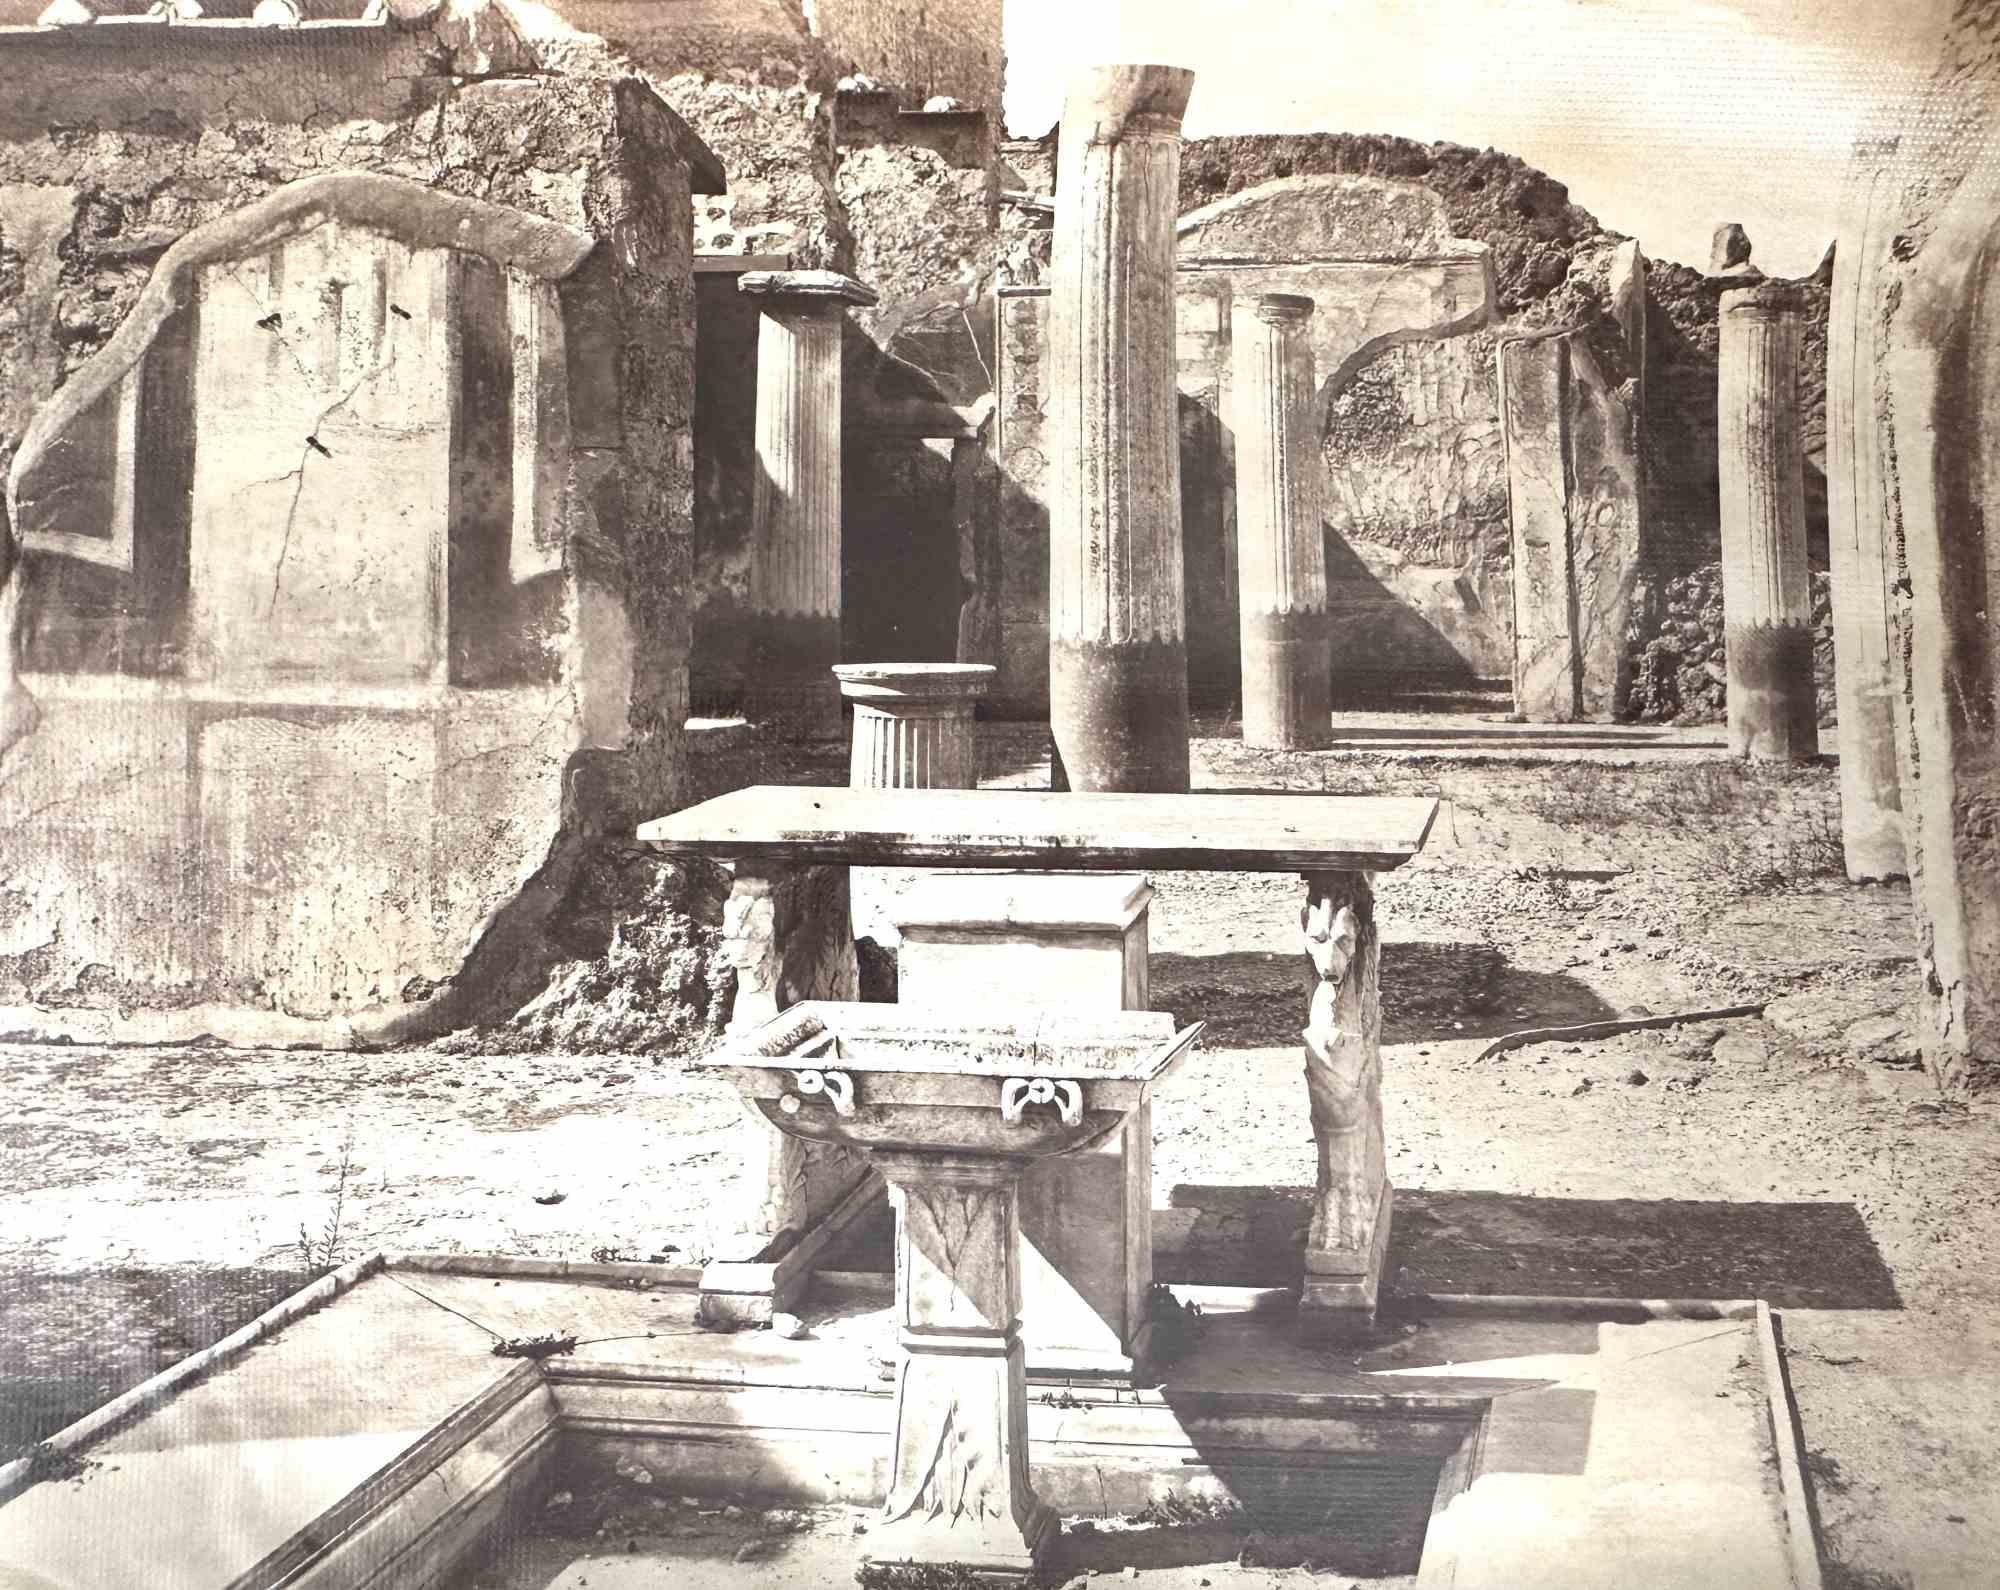 Unknown Figurative Photograph - Historical Photo - Roman Columns - Vintage photo - Early 20th Century